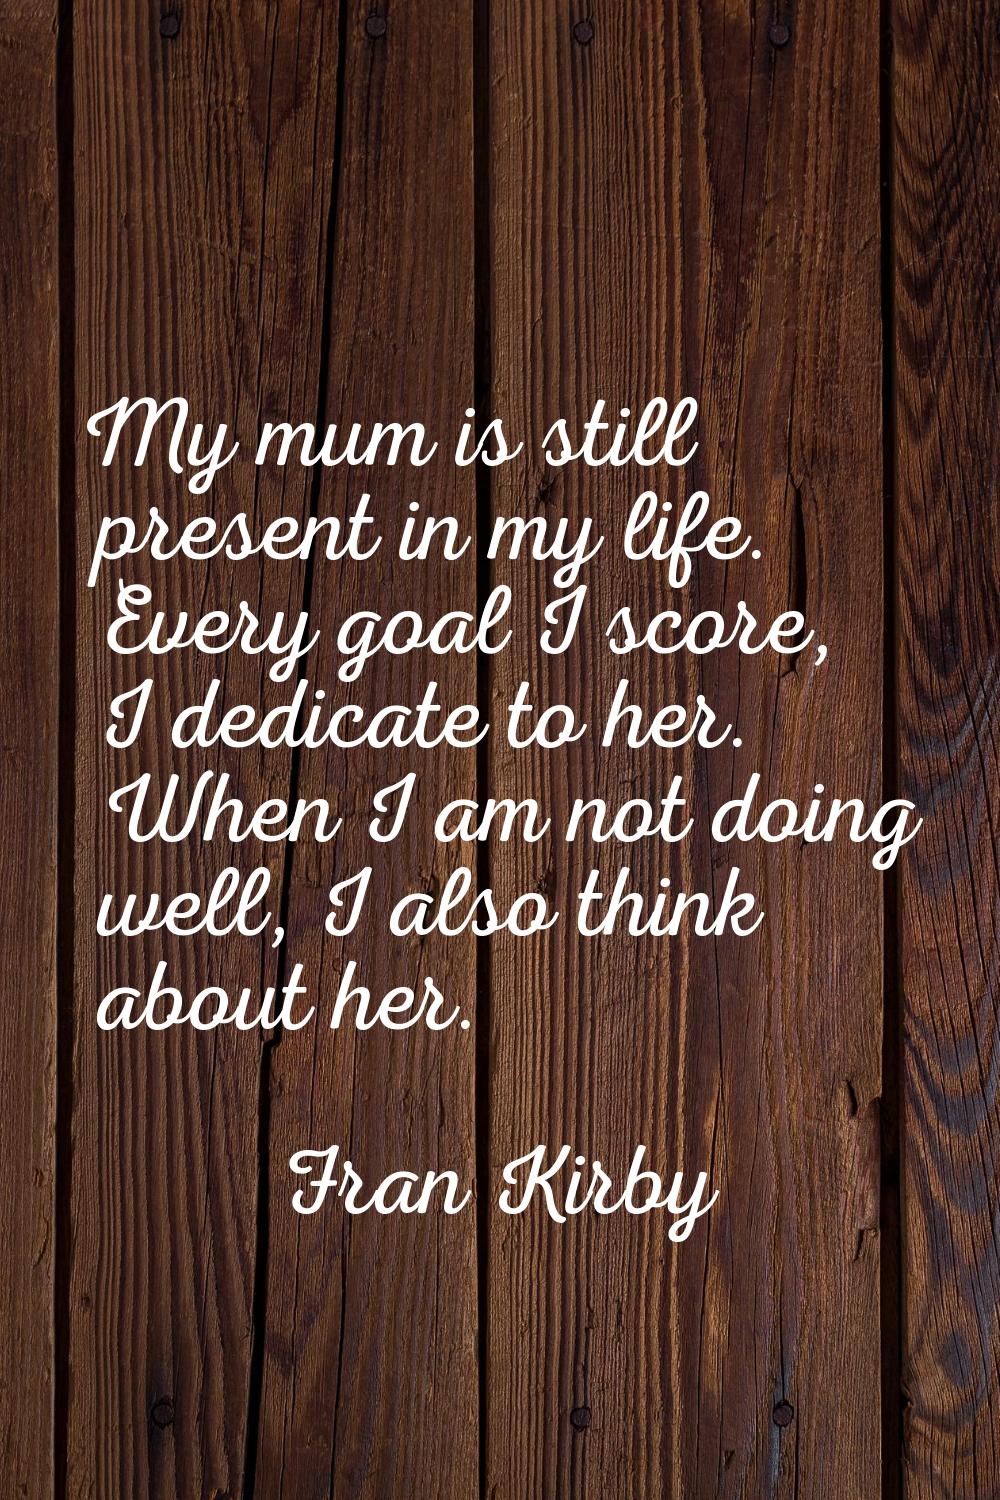 My mum is still present in my life. Every goal I score, I dedicate to her. When I am not doing well